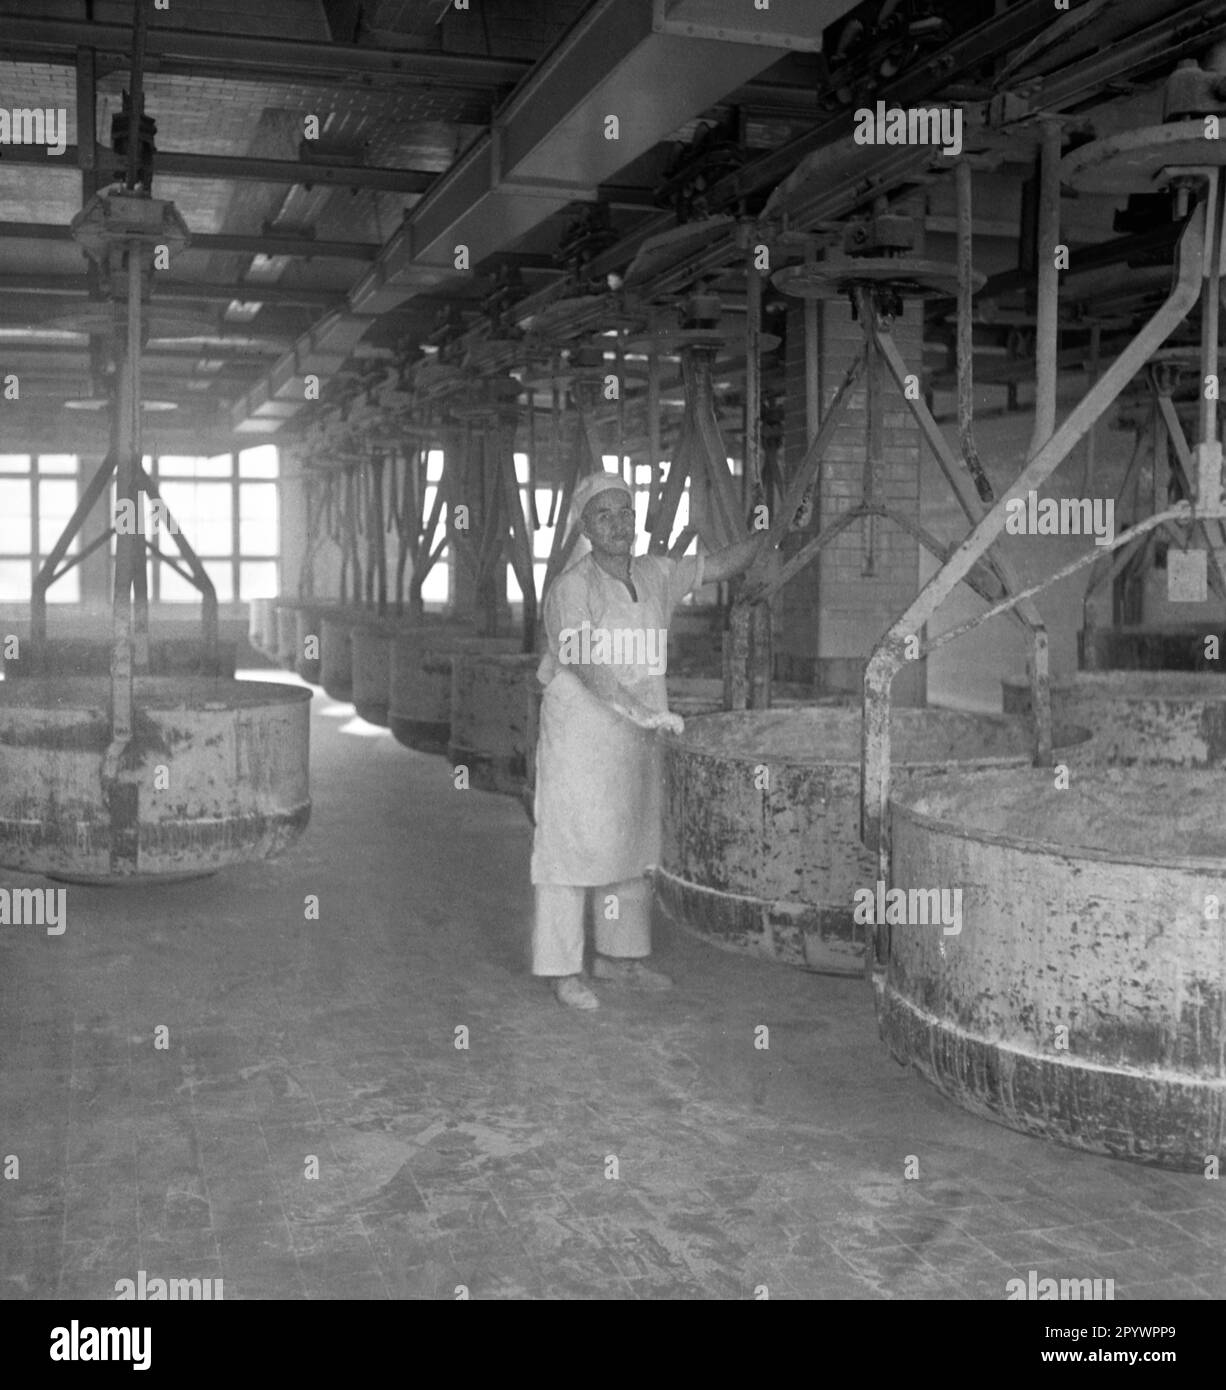 An employee of the industrial bakery Wittler with tubs for the dough production. The Wittler company was temporarily the largest bakery in Europe after the First World War. Stock Photo